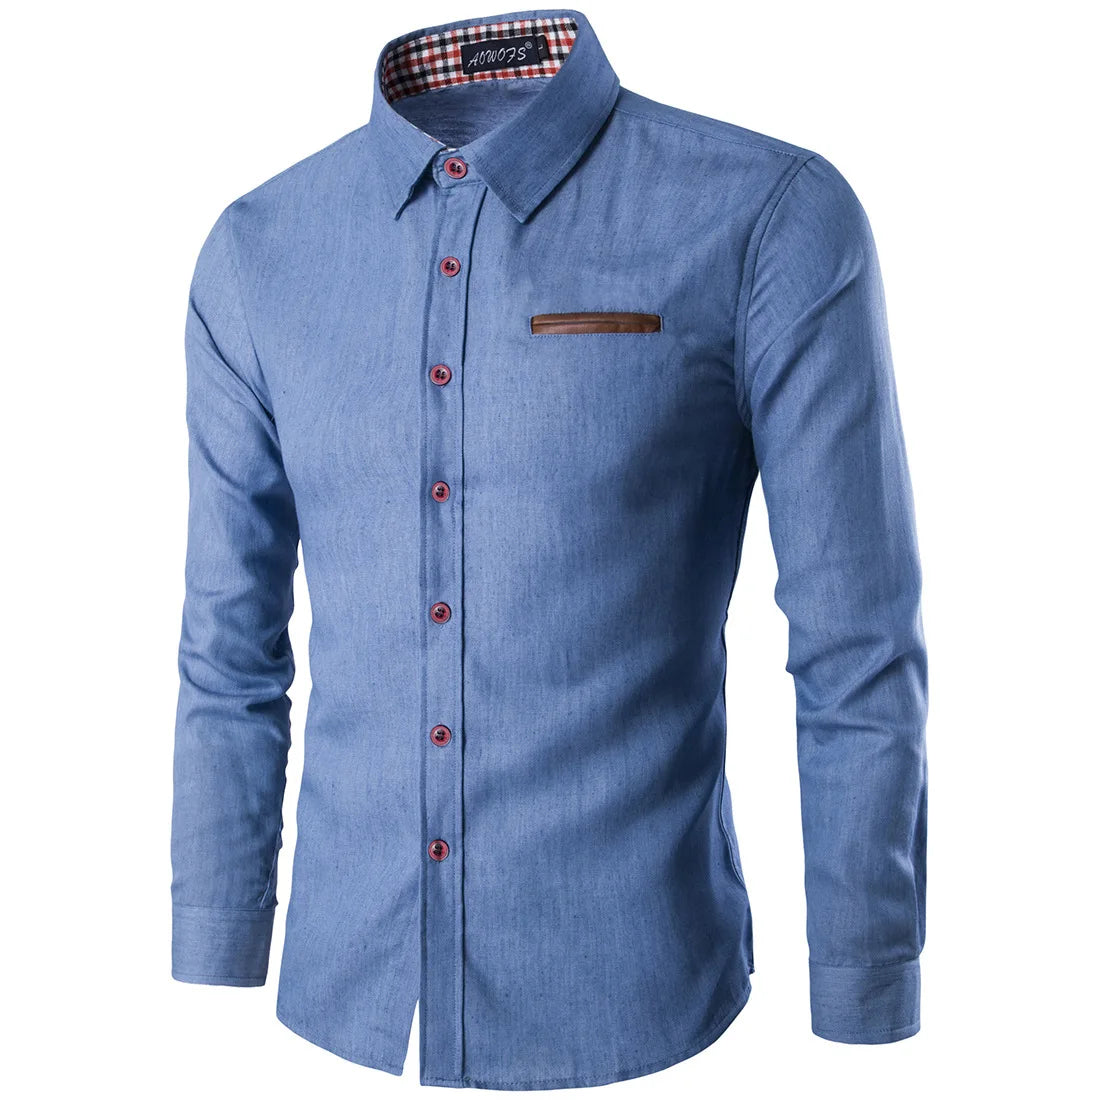 Spring New Denim Shirt For Man Long Sleeve Chest Pocket Slim Fit Male Top Jeans Mens Clothing SELL with BUY